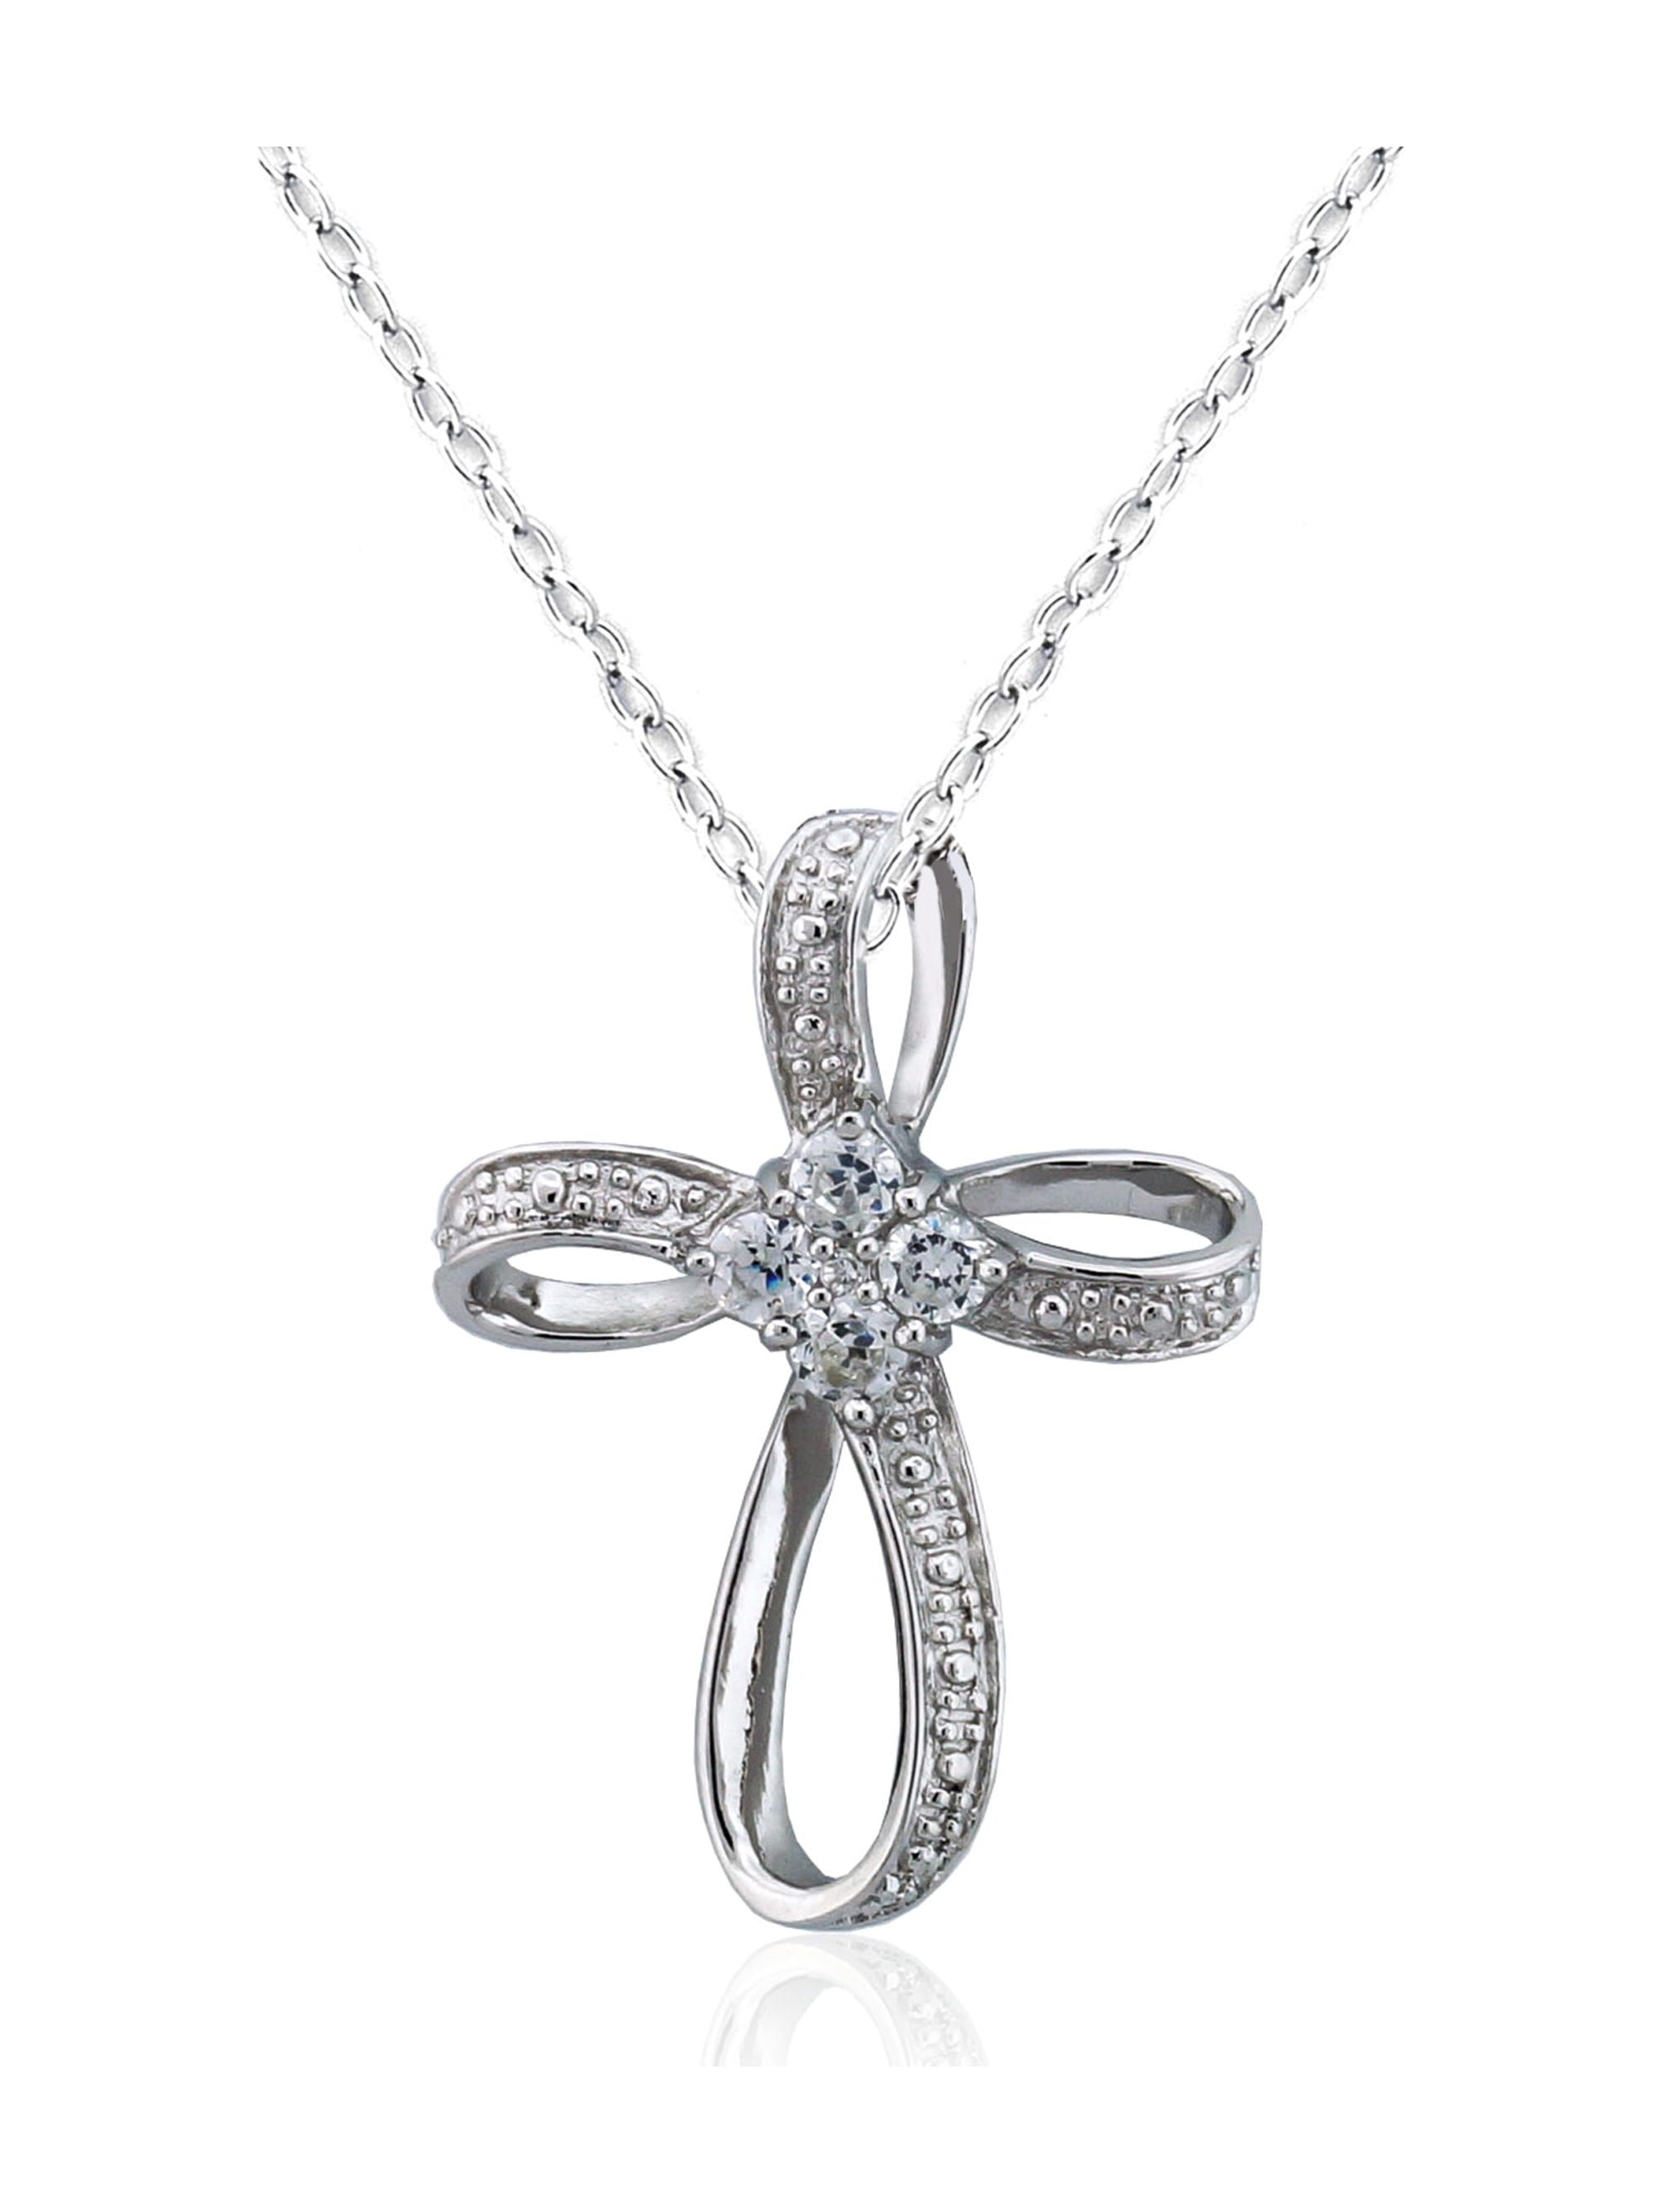 CZ Platinum-Plated Sterling Silver Curved Cross Pendant, 18